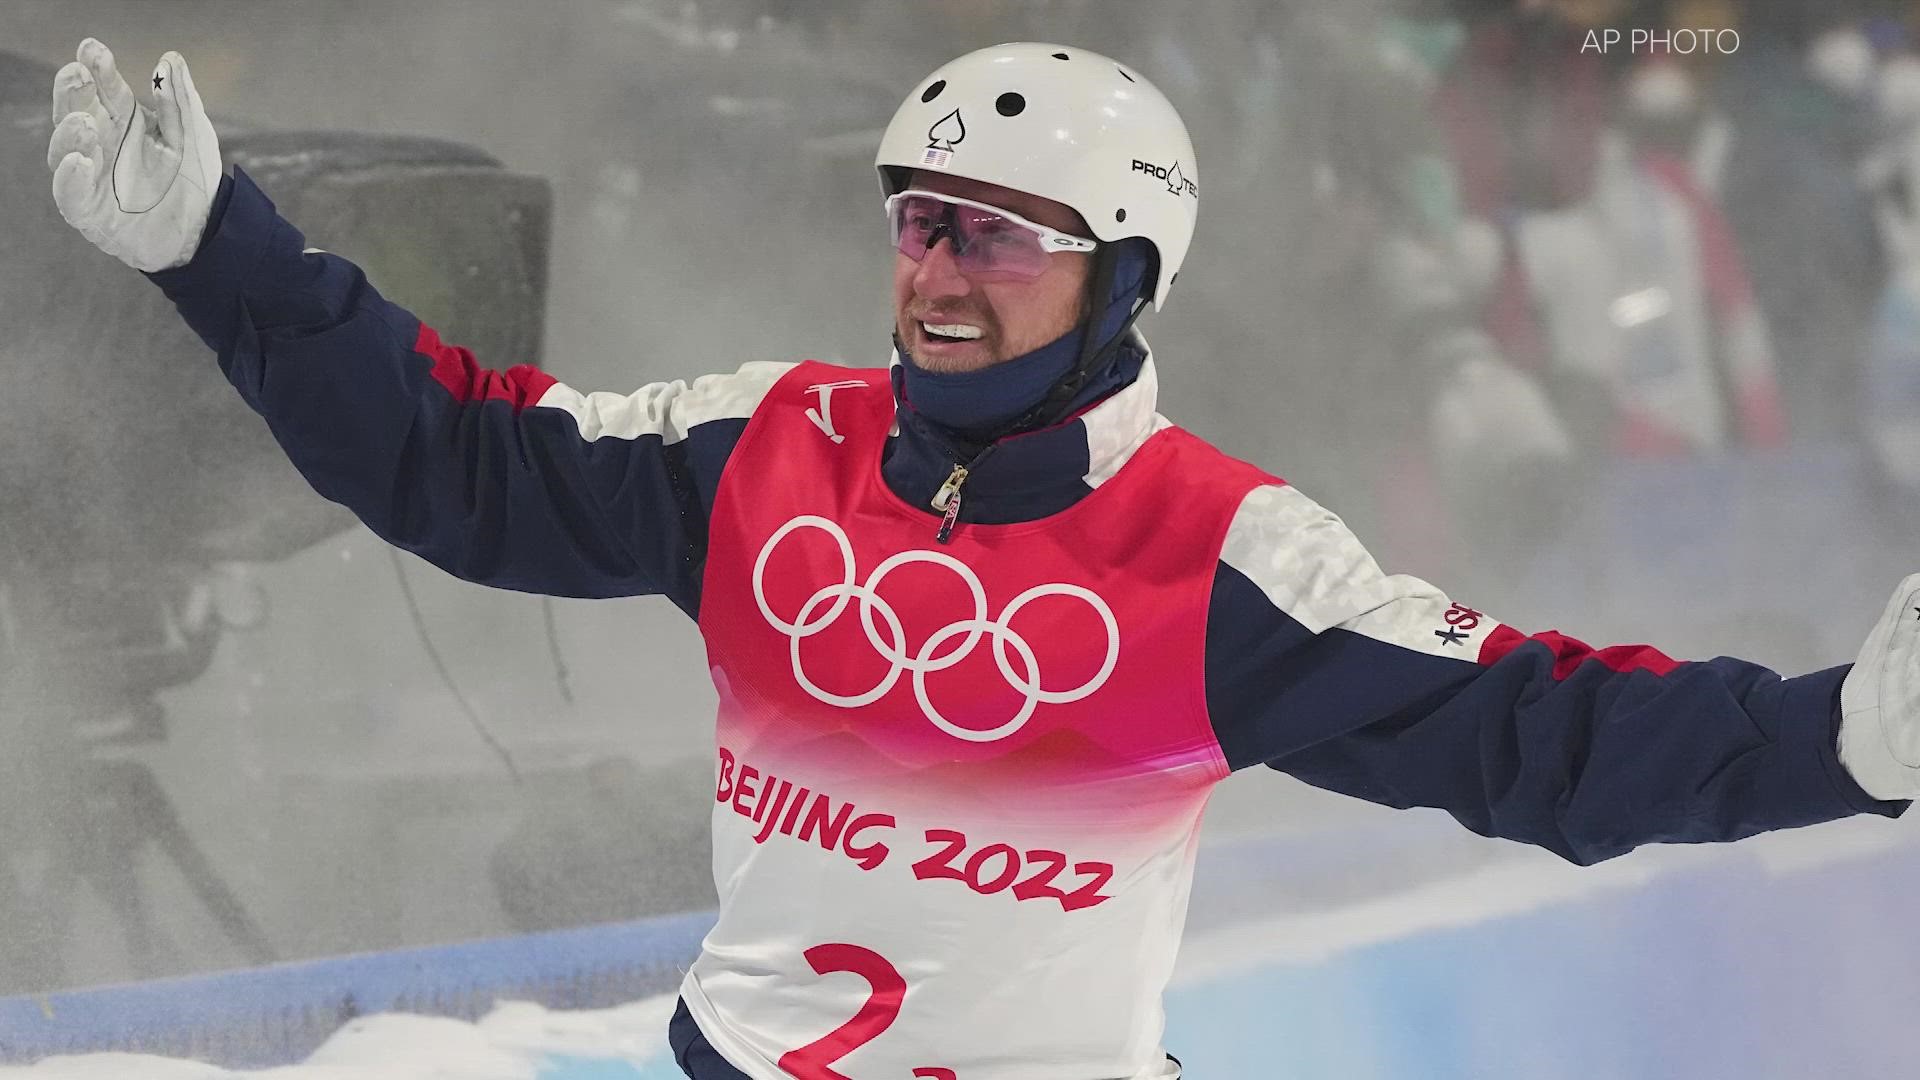 The Lawrenceburg resident is the first Hoosier ever to claim a gold medal for Team USA at the Winter Olympics!